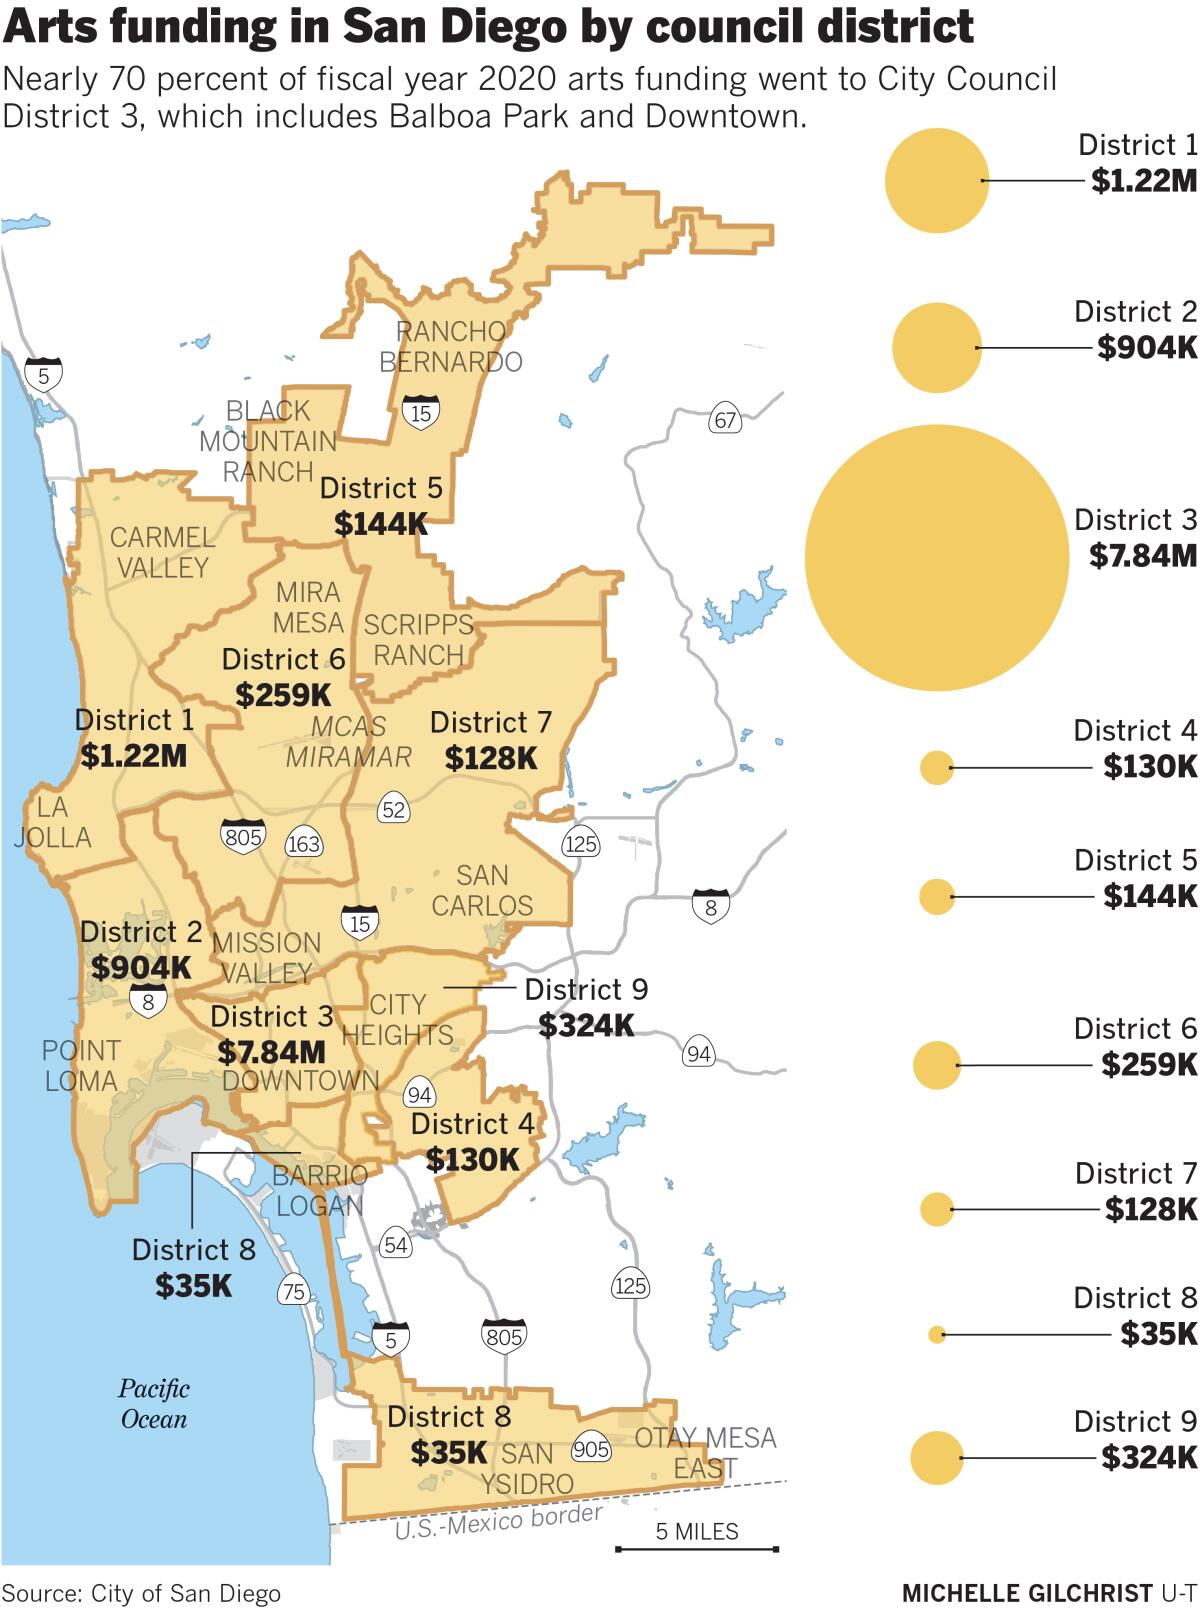 Art funding in San Diego by council district